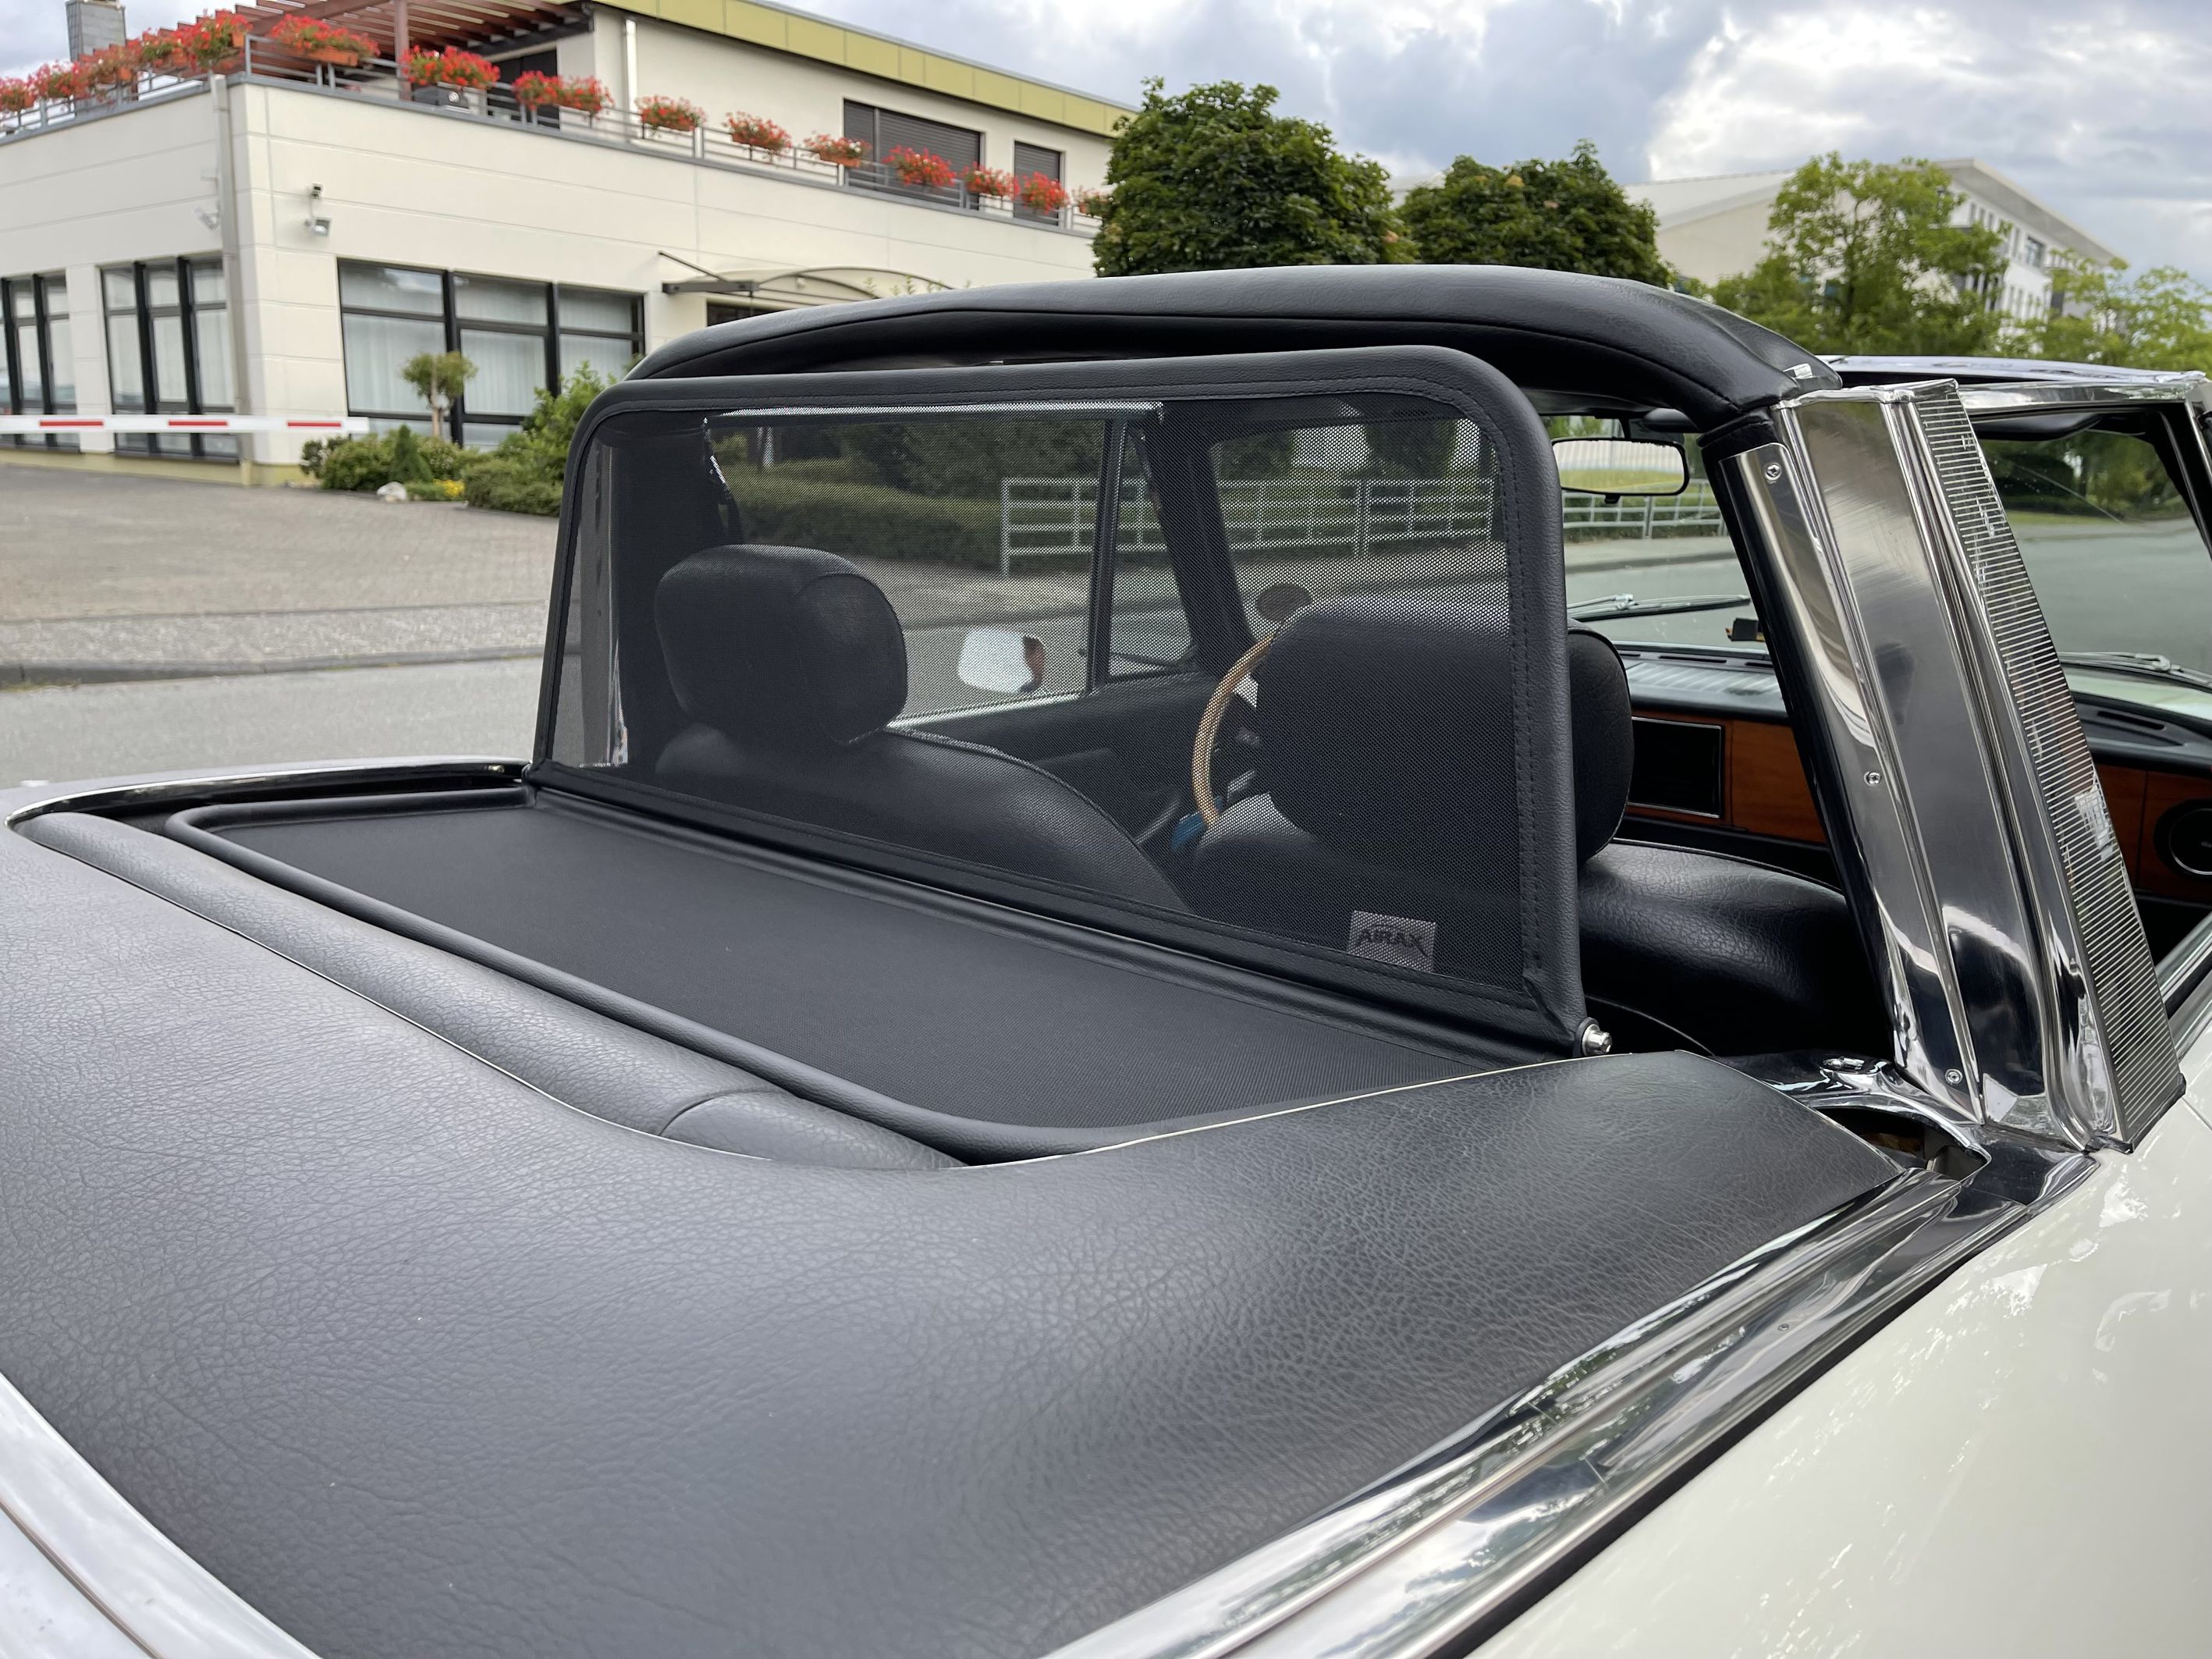 Airax wind deflector suitable for Triumph Stag 